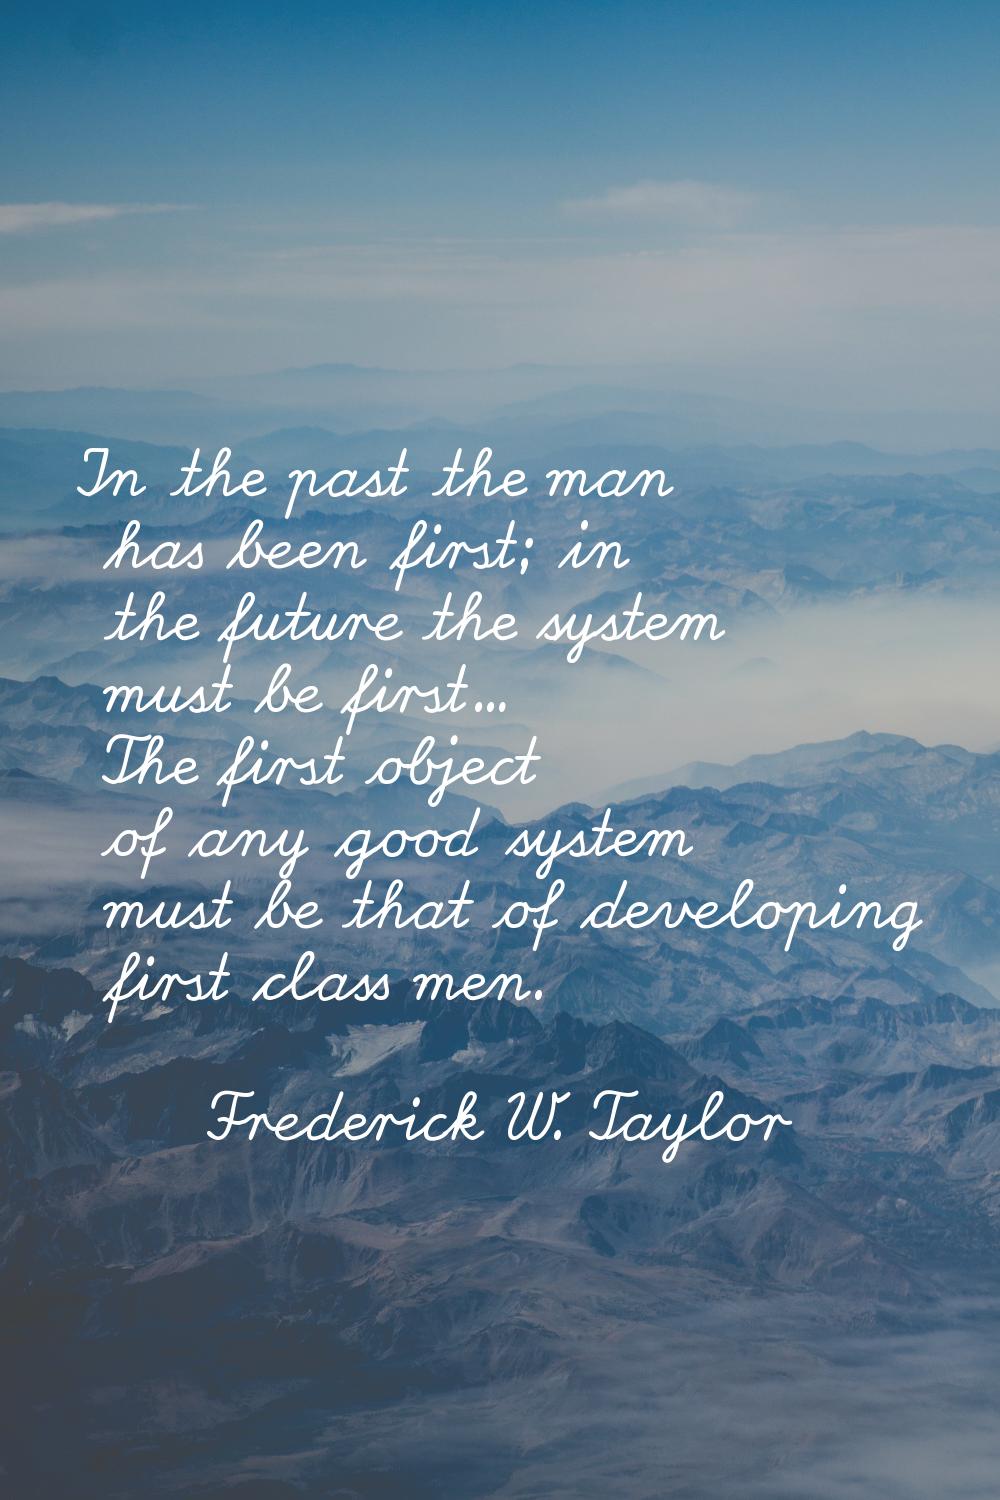 In the past the man has been first; in the future the system must be first... The first object of a